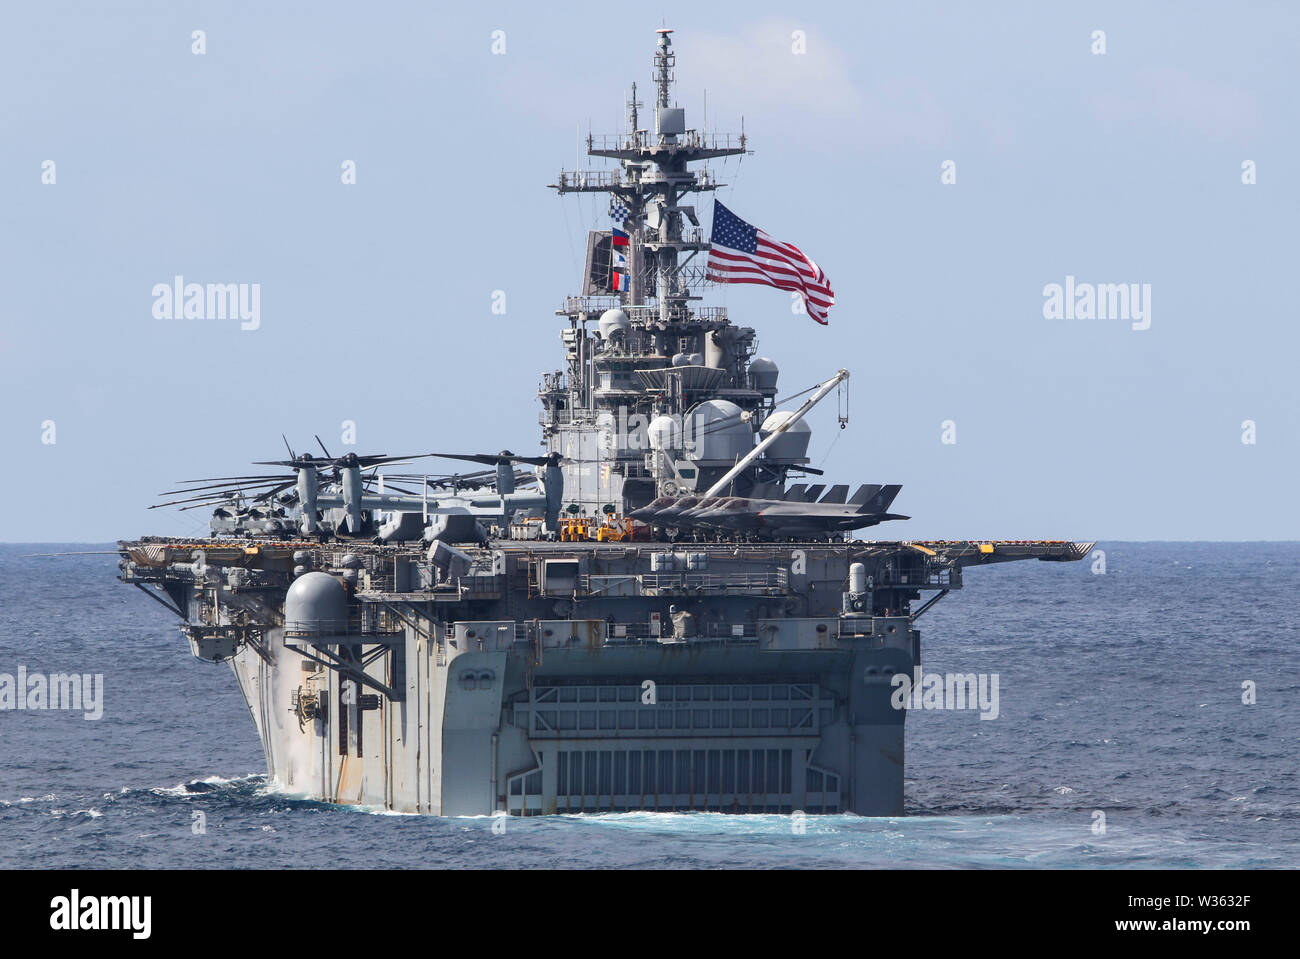 190711-N-DX072-1017 TASMAN SEA (July 11, 2019) The U.S. Navy amphibious assault ship USS Wasp (LHD 1) transits with the amphibious transport dock ship USS Green Bay (LPD 20) in a photo exercise (PHOTOEX) during Talisman Sabre 2019. Green Bay, part of the Wasp Expeditionary Strike Group, with embarked 31st Marine Expeditionary Unit, is currently participating in Talisman Sabre 2019 off the coast of Northern Australia. A bilateral, biennial event, Talisman Sabre is designed to improve U.S. and Australian combat training, readiness and interoperability through realistic, relevant training necessa Stock Photo